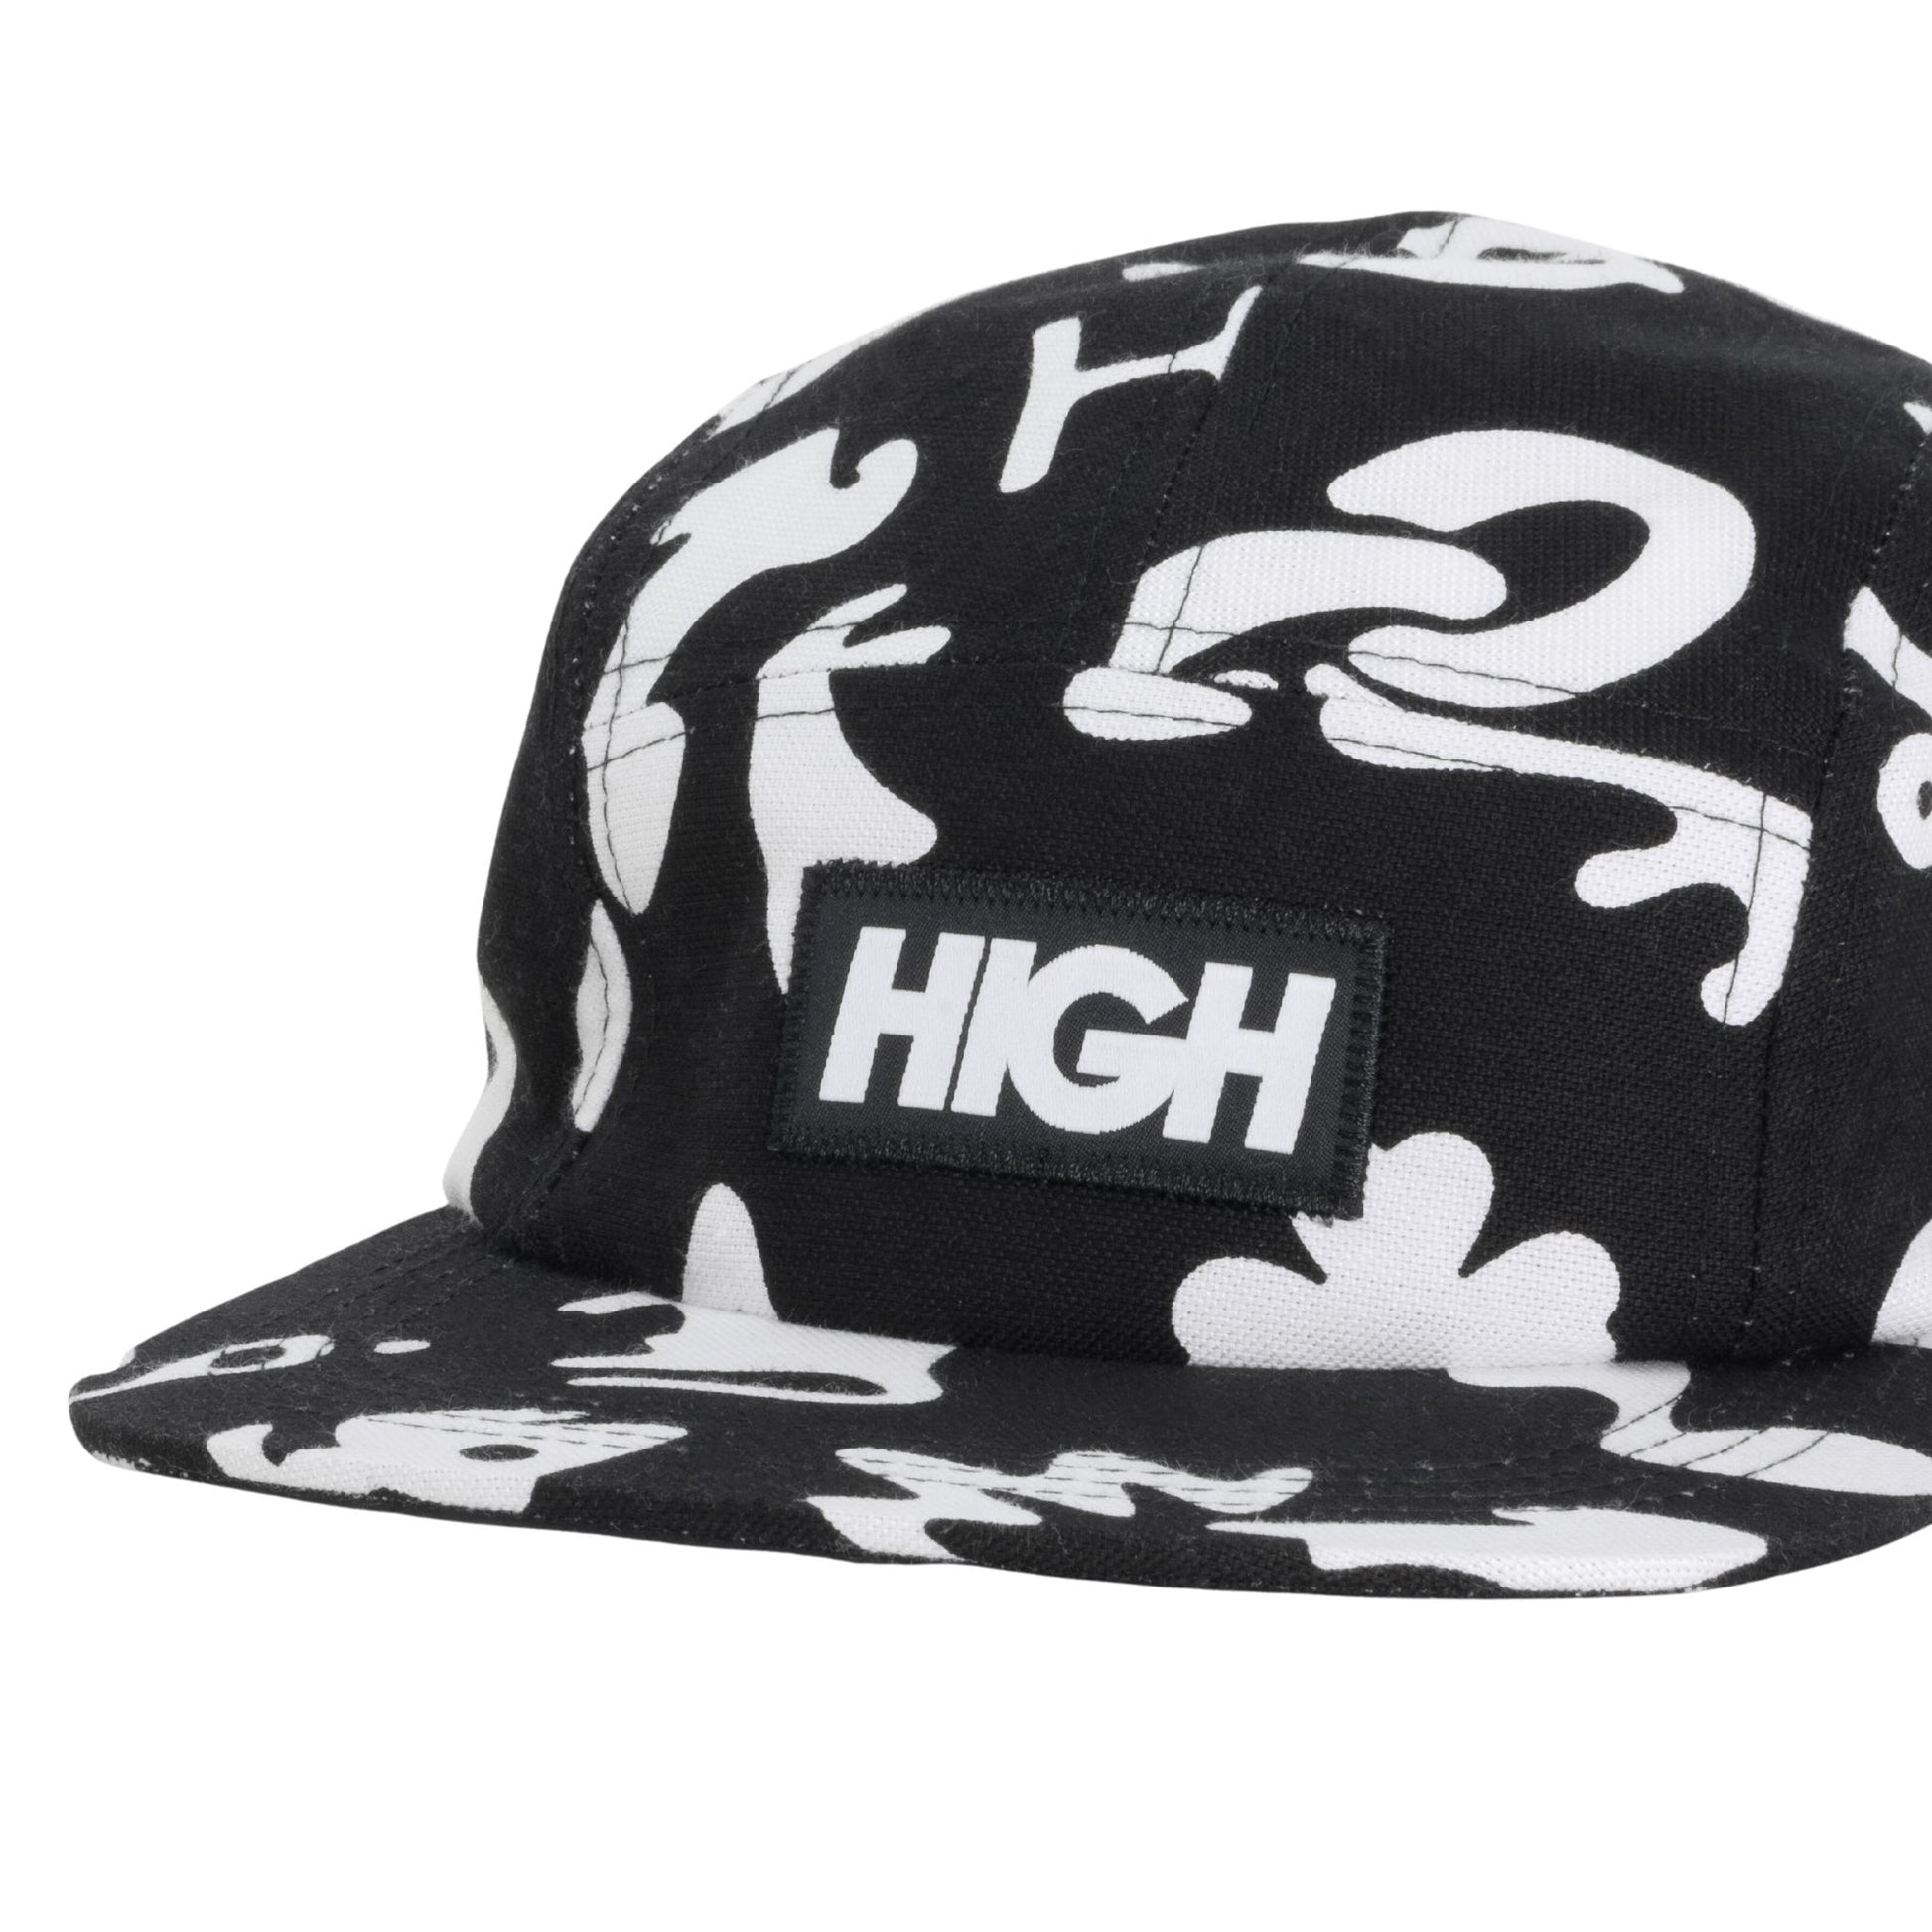 HIGH - 5 Panel Overall "Black" - THE GAME